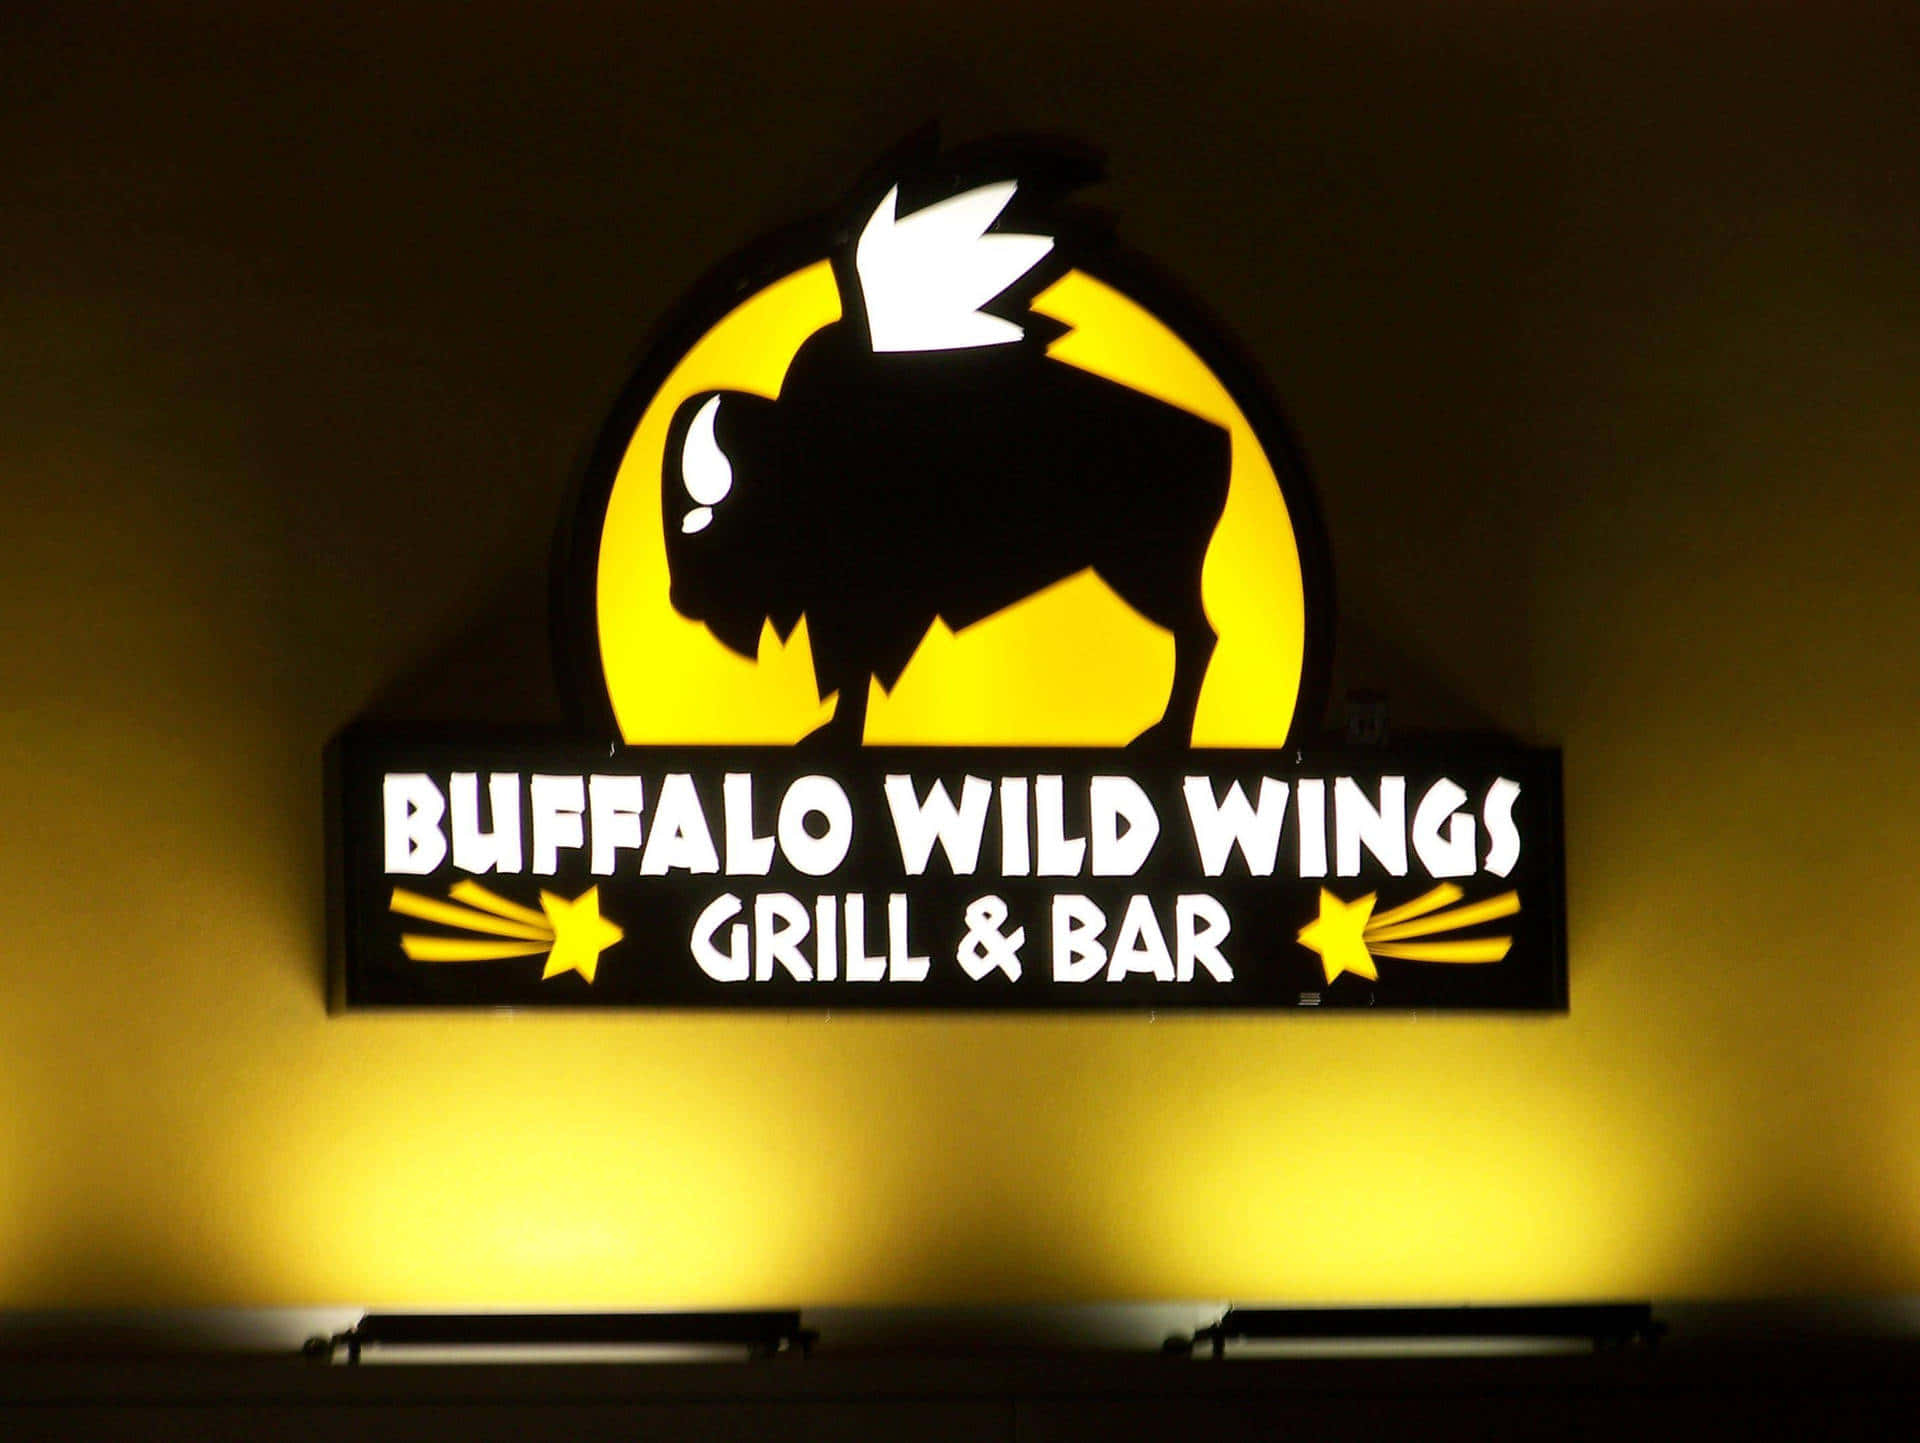 “Taste the Difference of Buffalo Wild Wings Today”